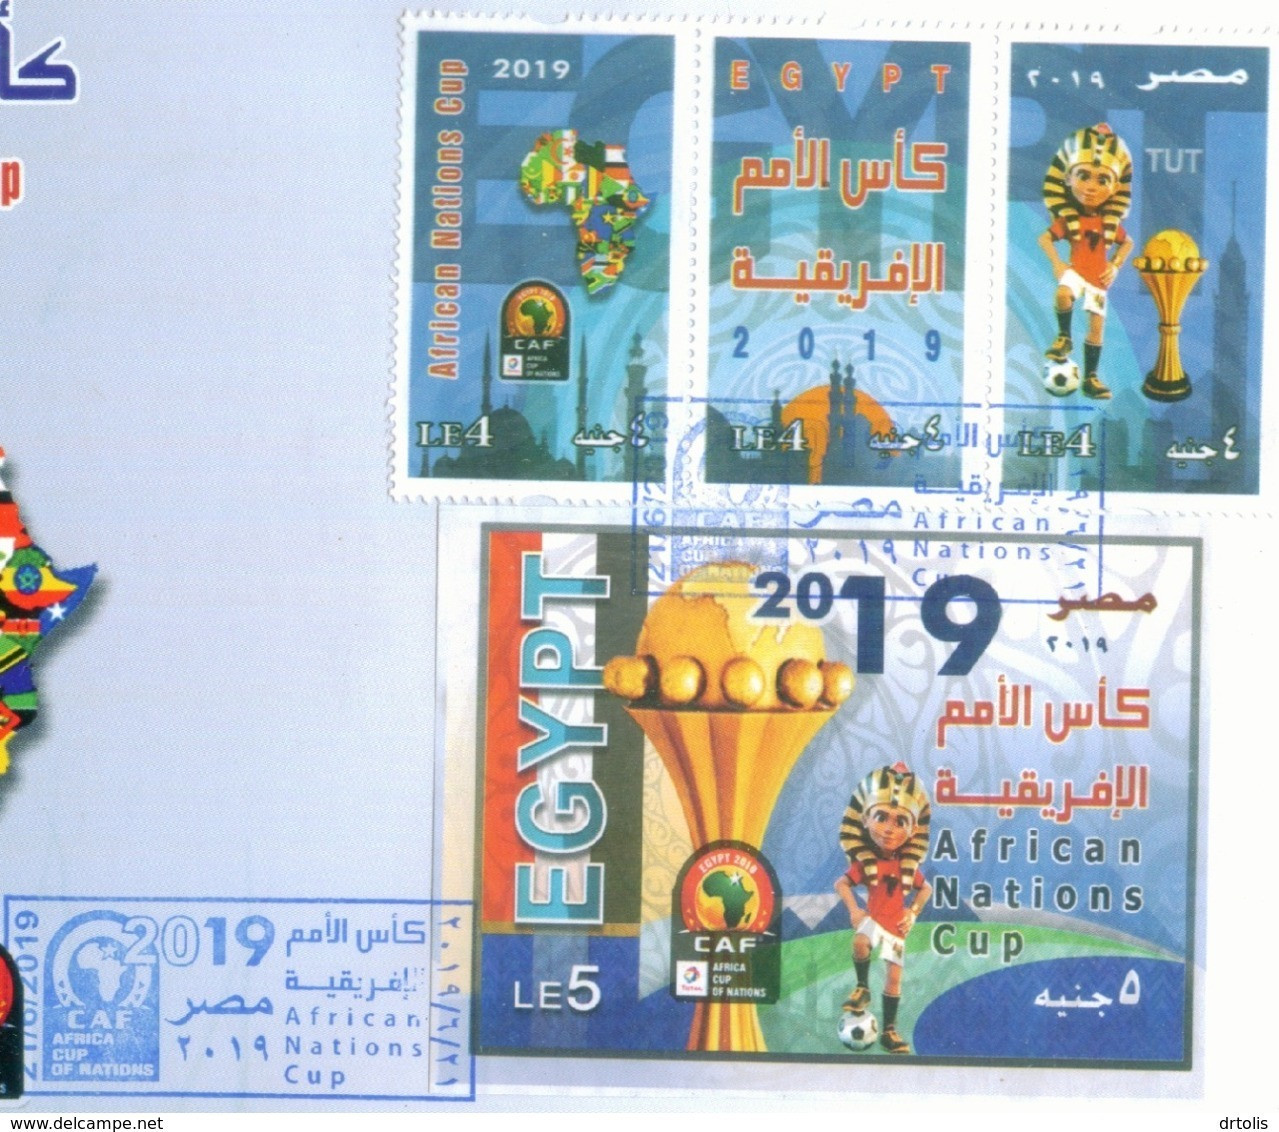 EGYPT / 2019 / AFRICAN NATIONS CUP / SPORT / FOOTBALL / CAF / MAP / FLAG / TUT / FDC - Cartas & Documentos